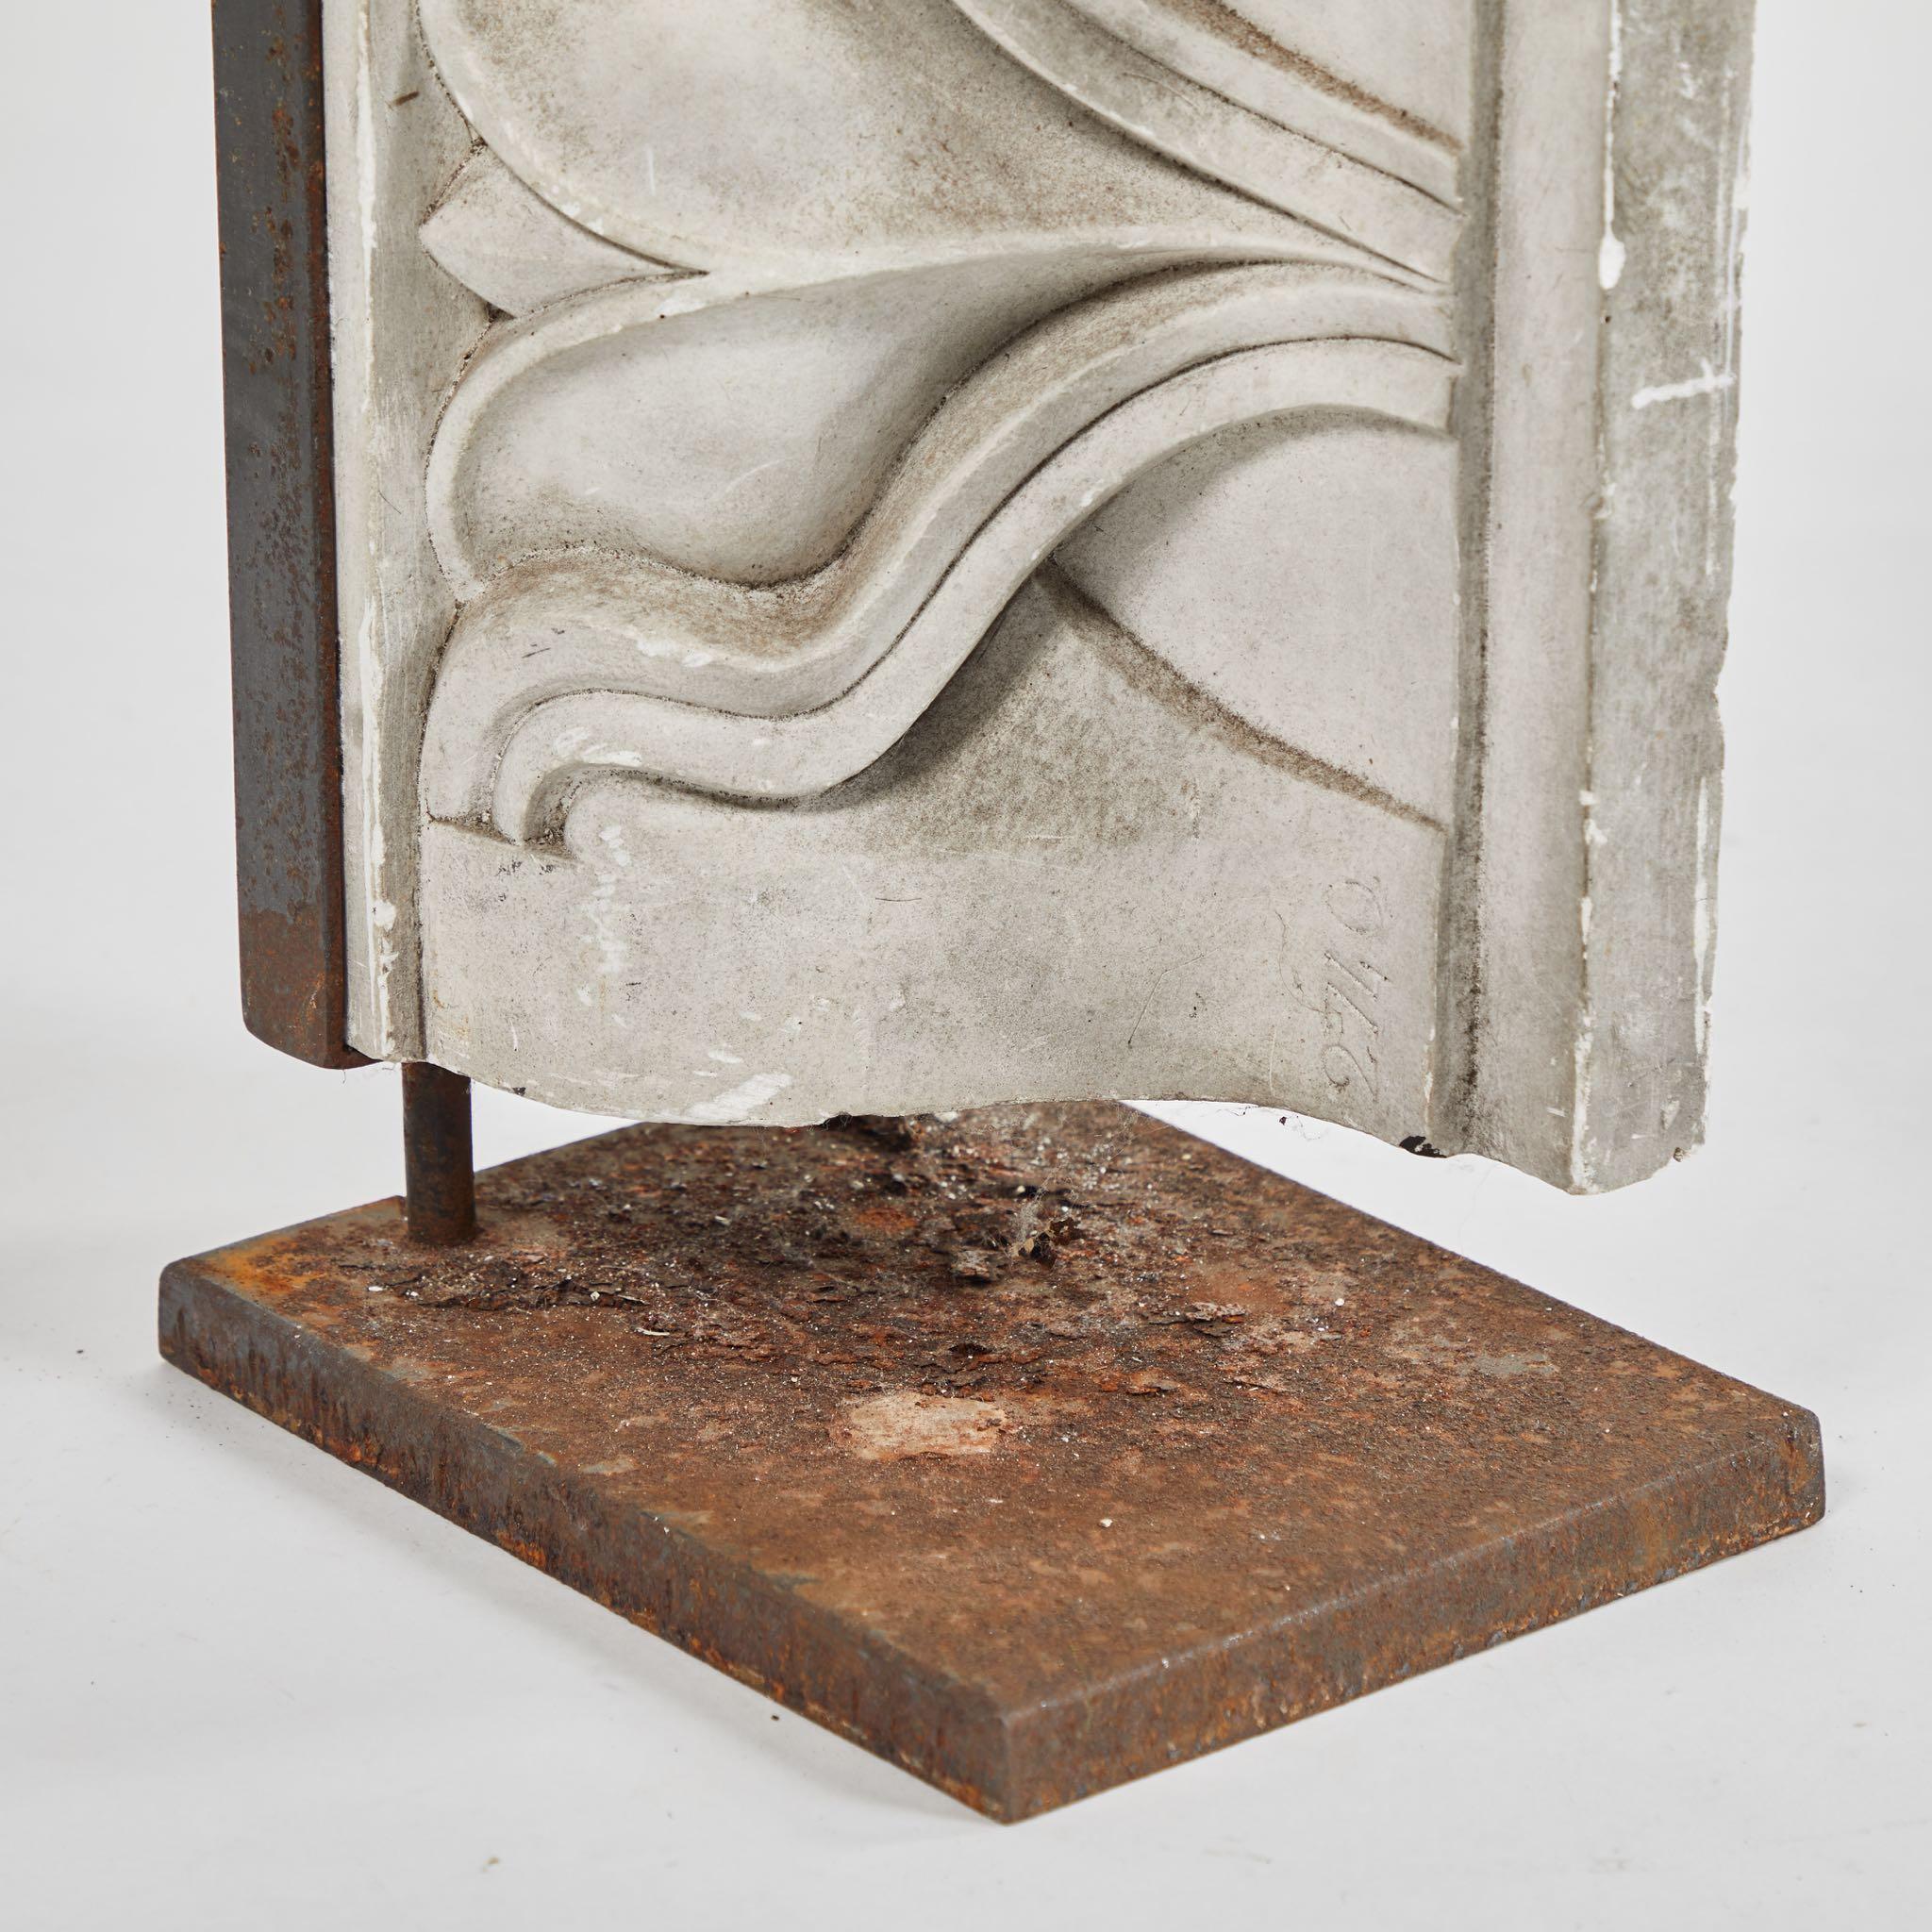 English Carved Plaster Architectural Relief Mounted on Iron Stand